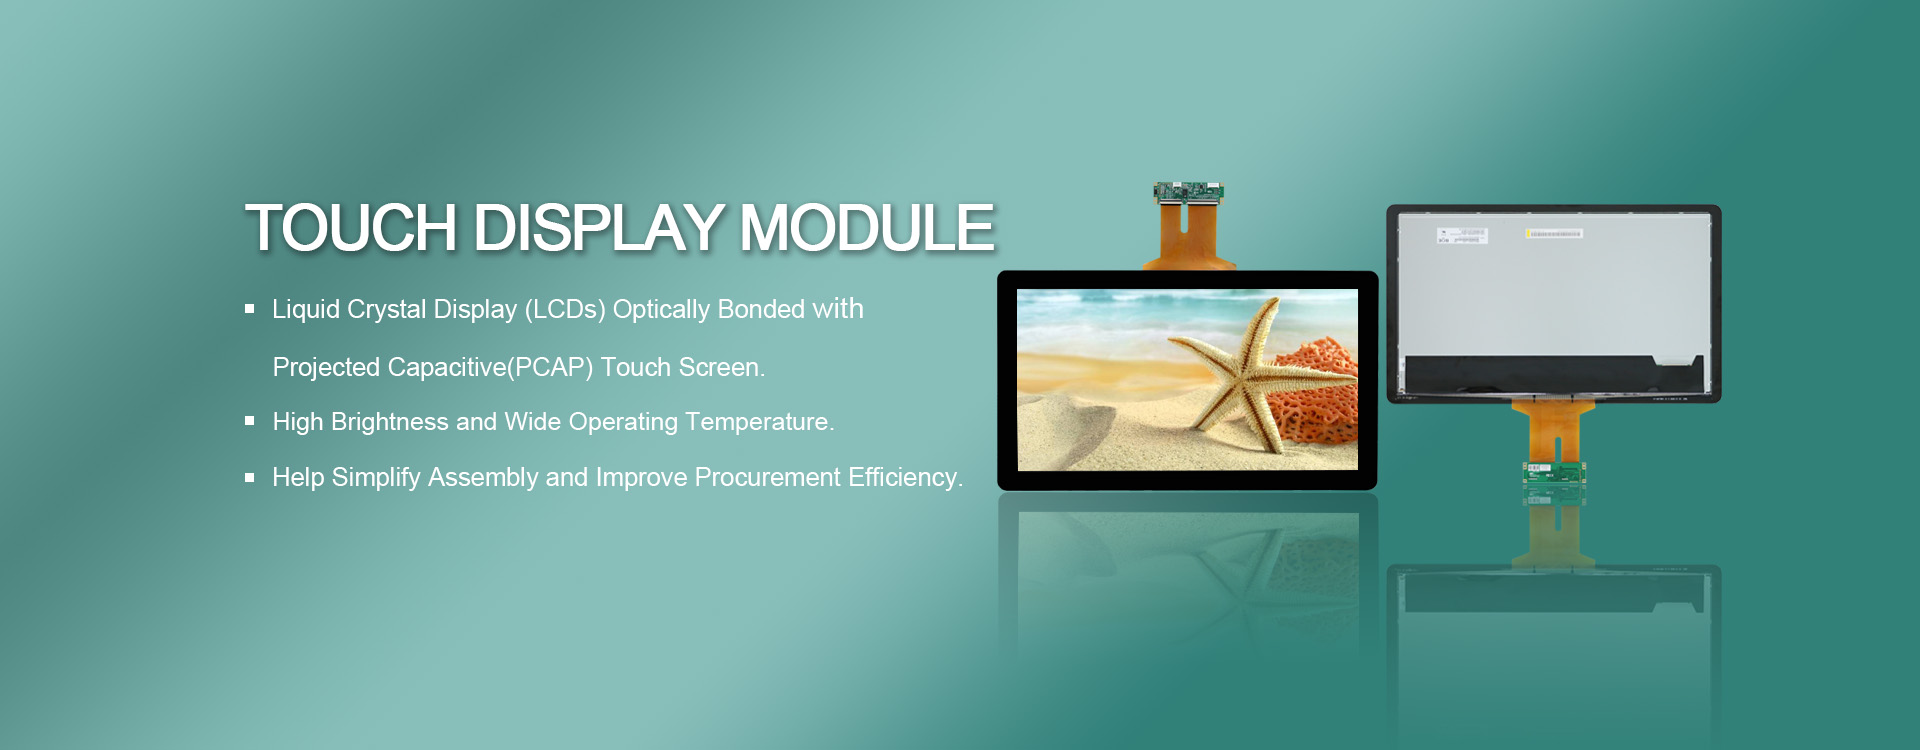 43multi-touch display